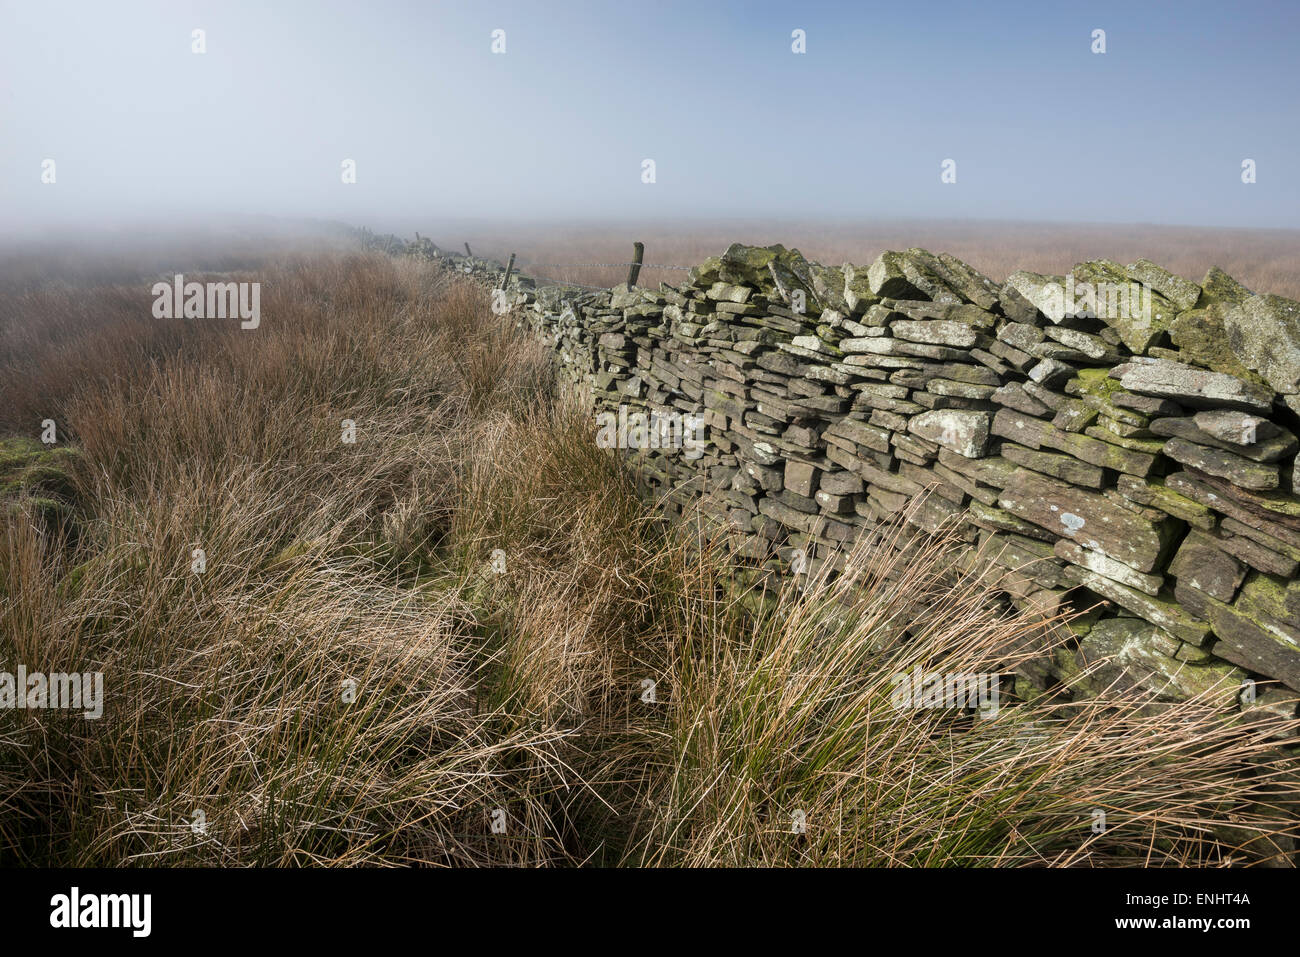 Moorland reeds and a drystone wall near Chinley in Derbyshire. An atmospheric, misty morning. Stock Photo